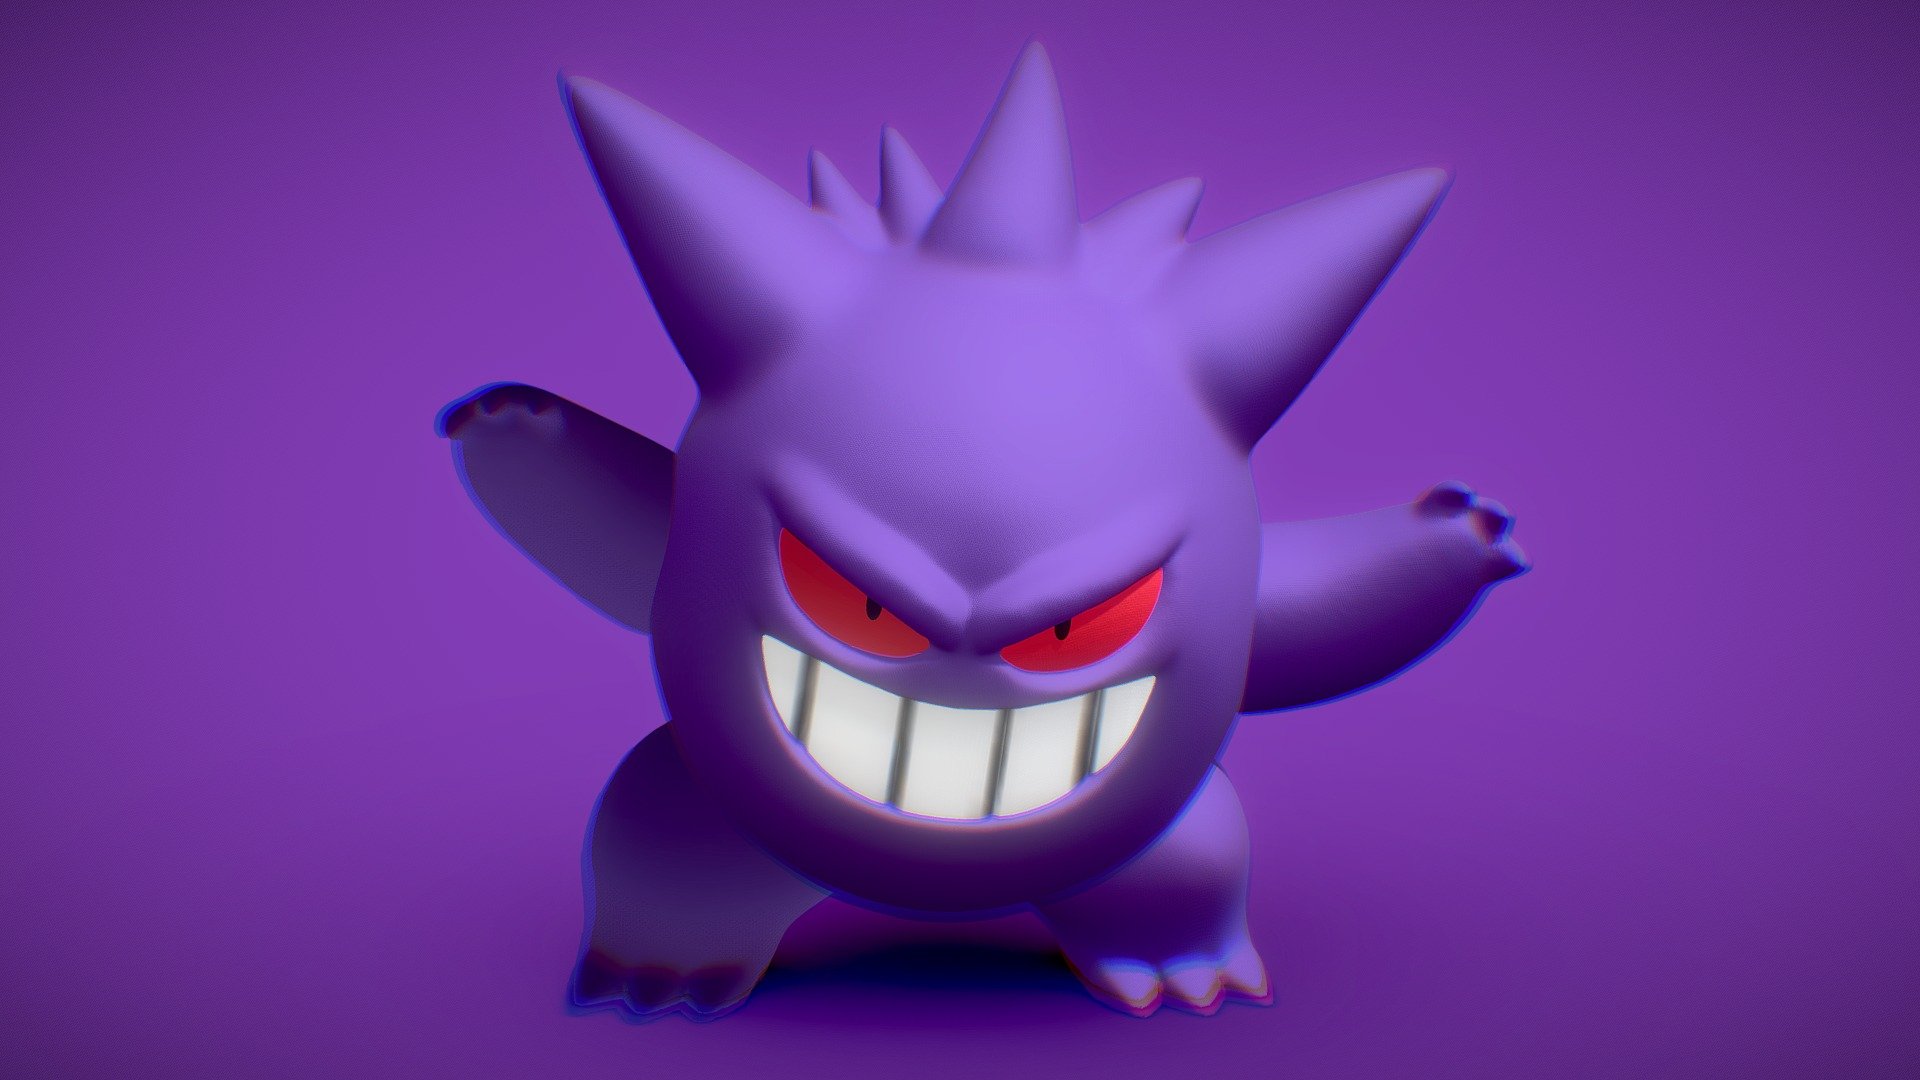 Gengar Boooh Time Detailed Model made from scratch. Can be printed with good resolution in 6 inches ( 15cm).

Render images:
https://www.instagram.com/lessab3d/ - Gengar - 3D Print - Buy Royalty Free 3D model by LessaB3D 3d model